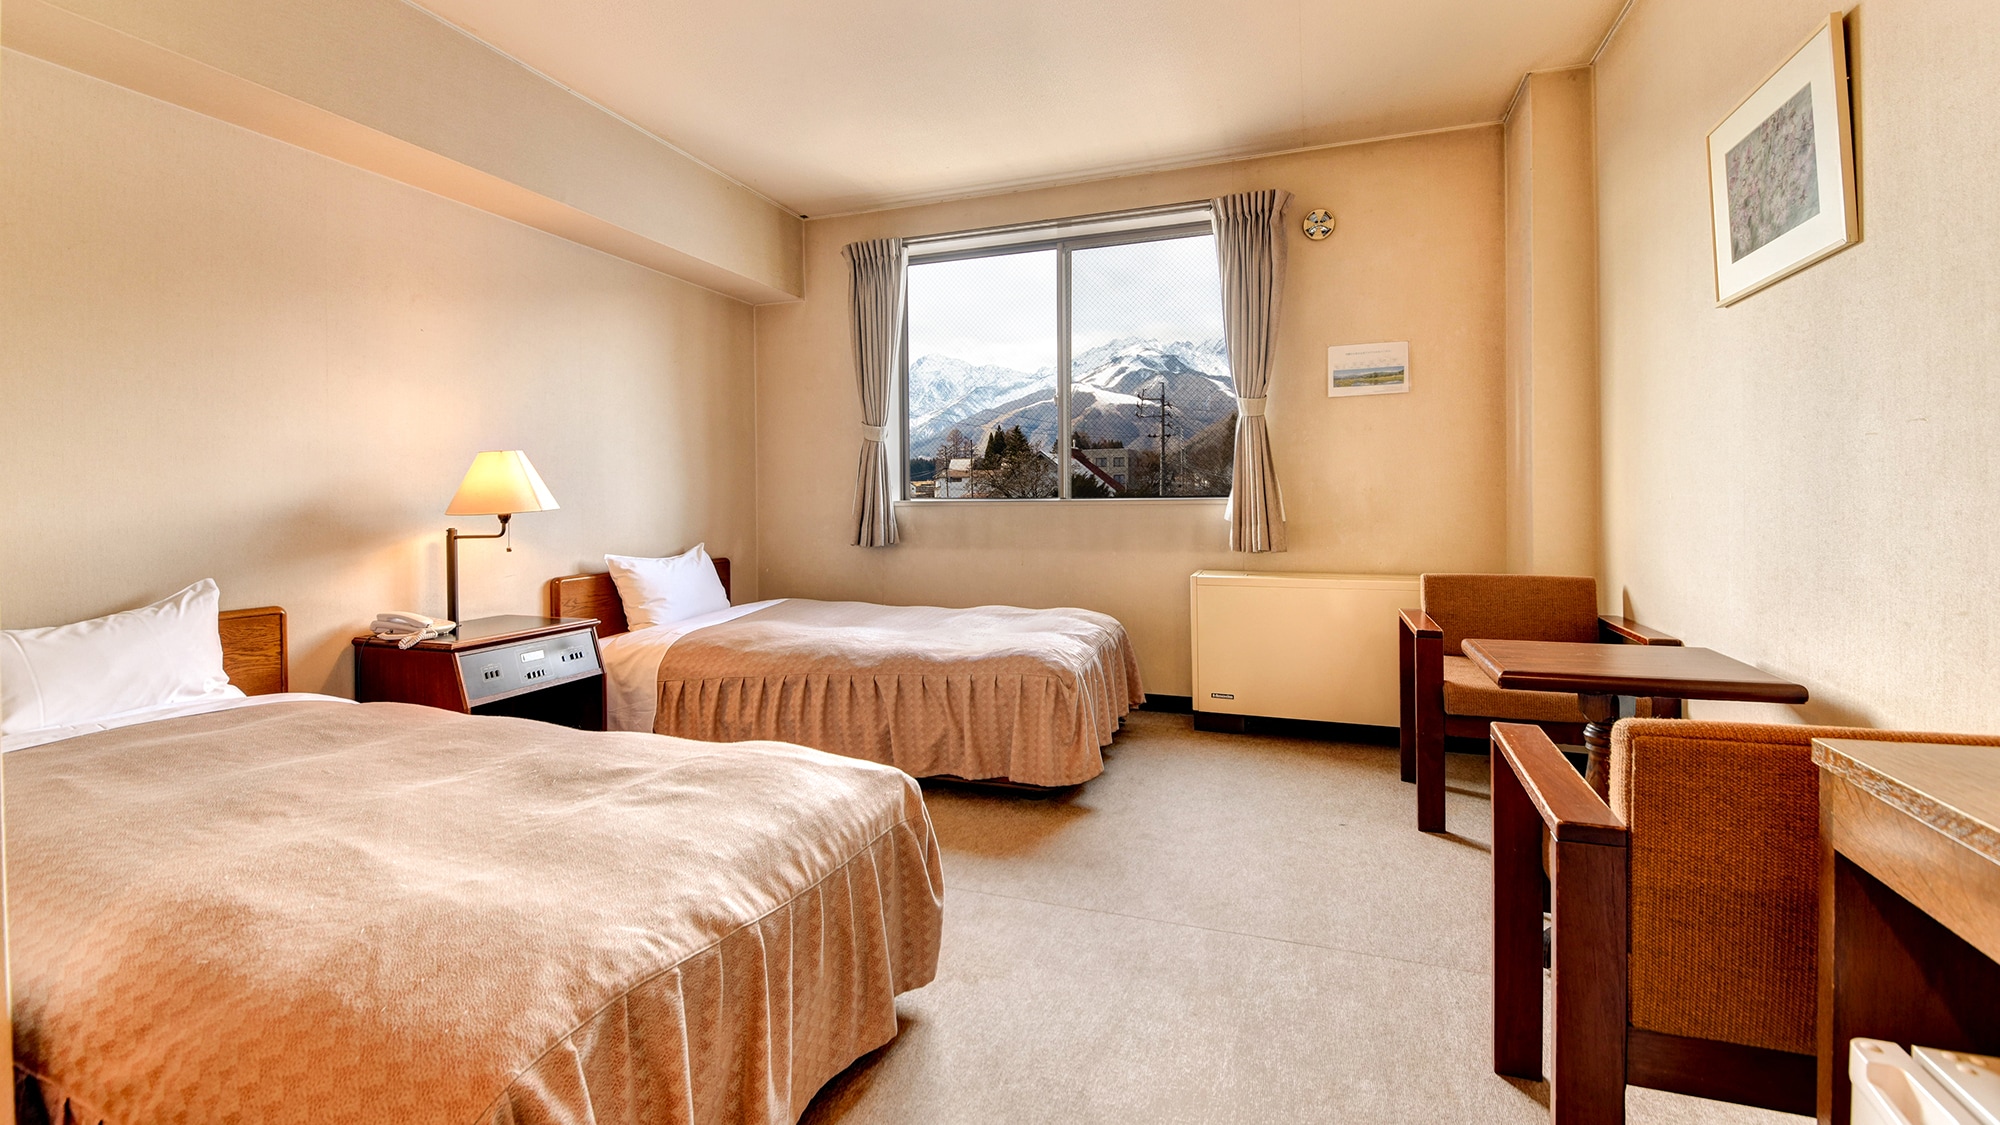 * Western-style room in the main building / A room with a panoramic view of the mountains of the Northern Alps.